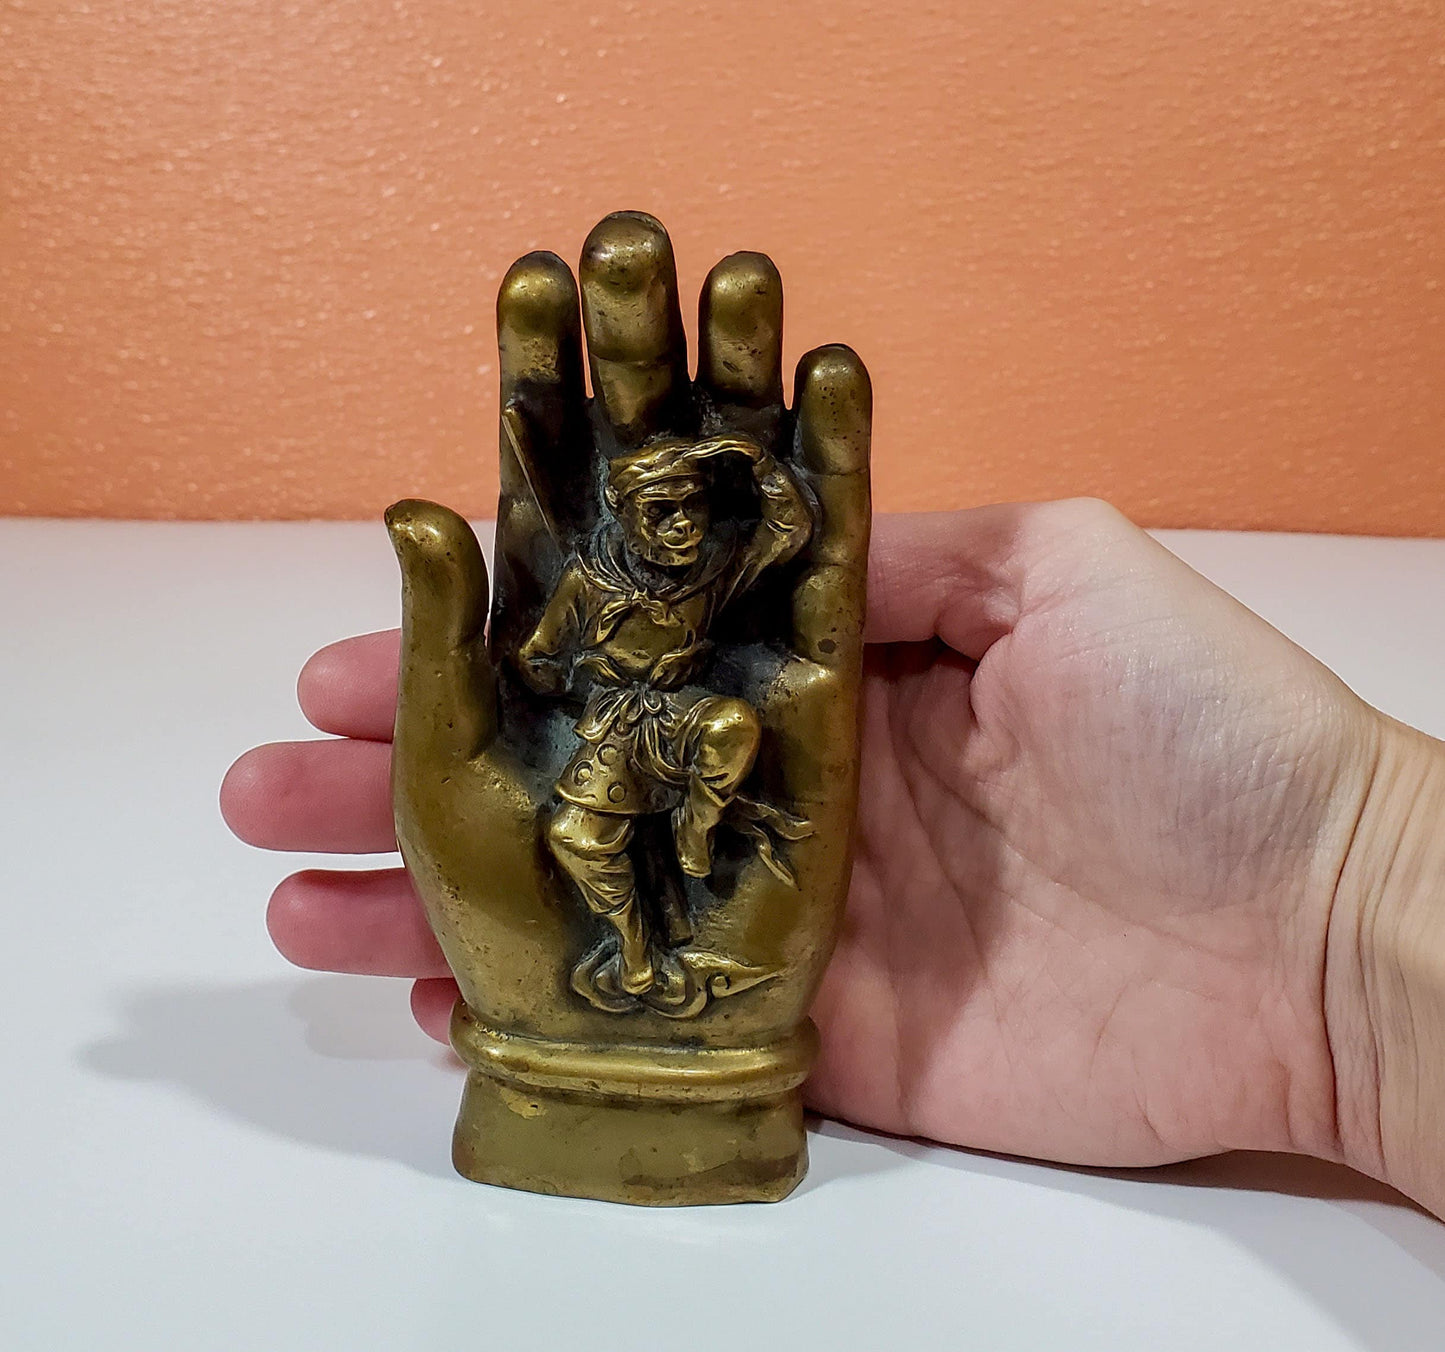 5.5" Vintage Chinese Brass Sun WuKong Handsome Monkey King In Buddha Hand Statue